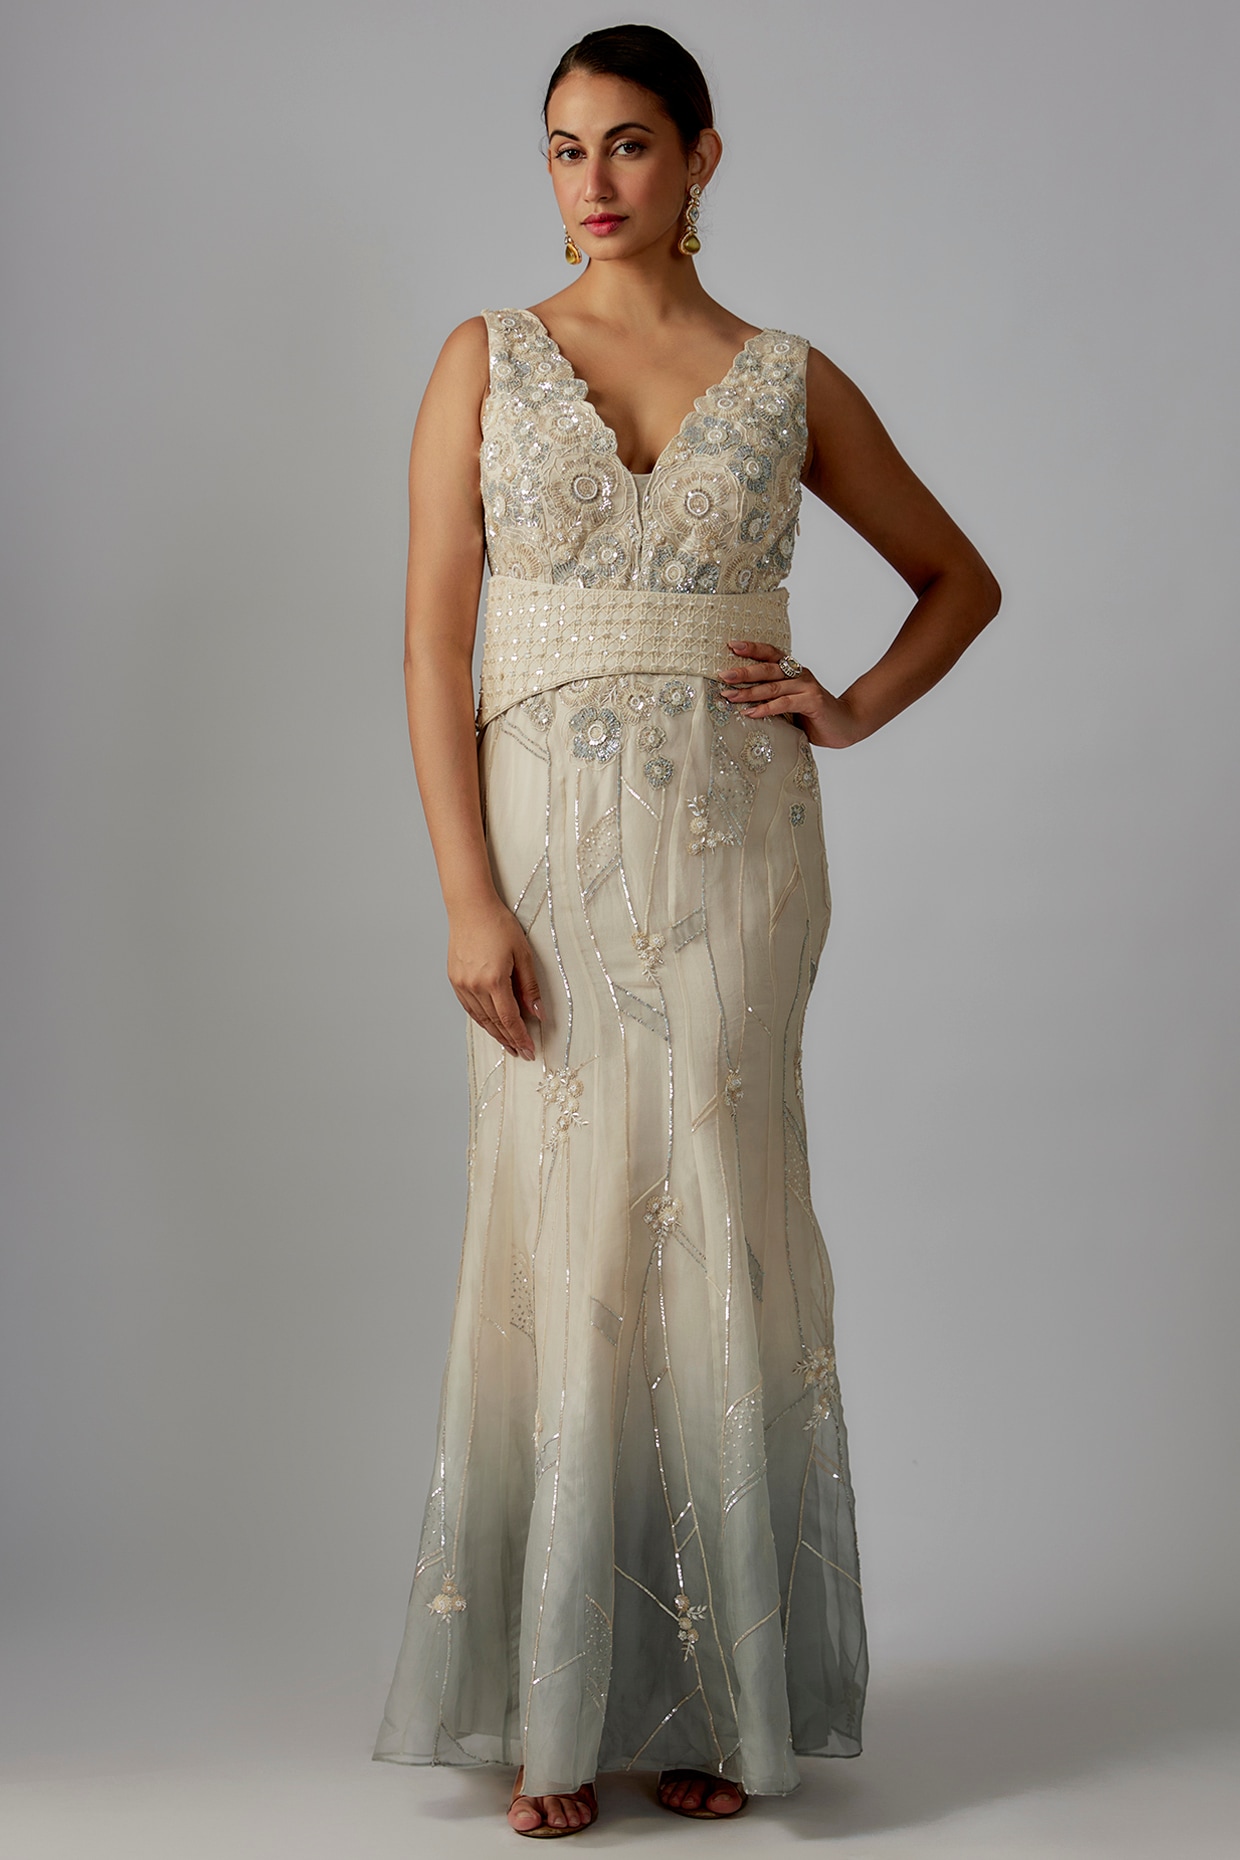 Embroidered Gown by Ambrosia now available at Aza Fashions | Gowns,  Embroidered gown, Strapless dress formal